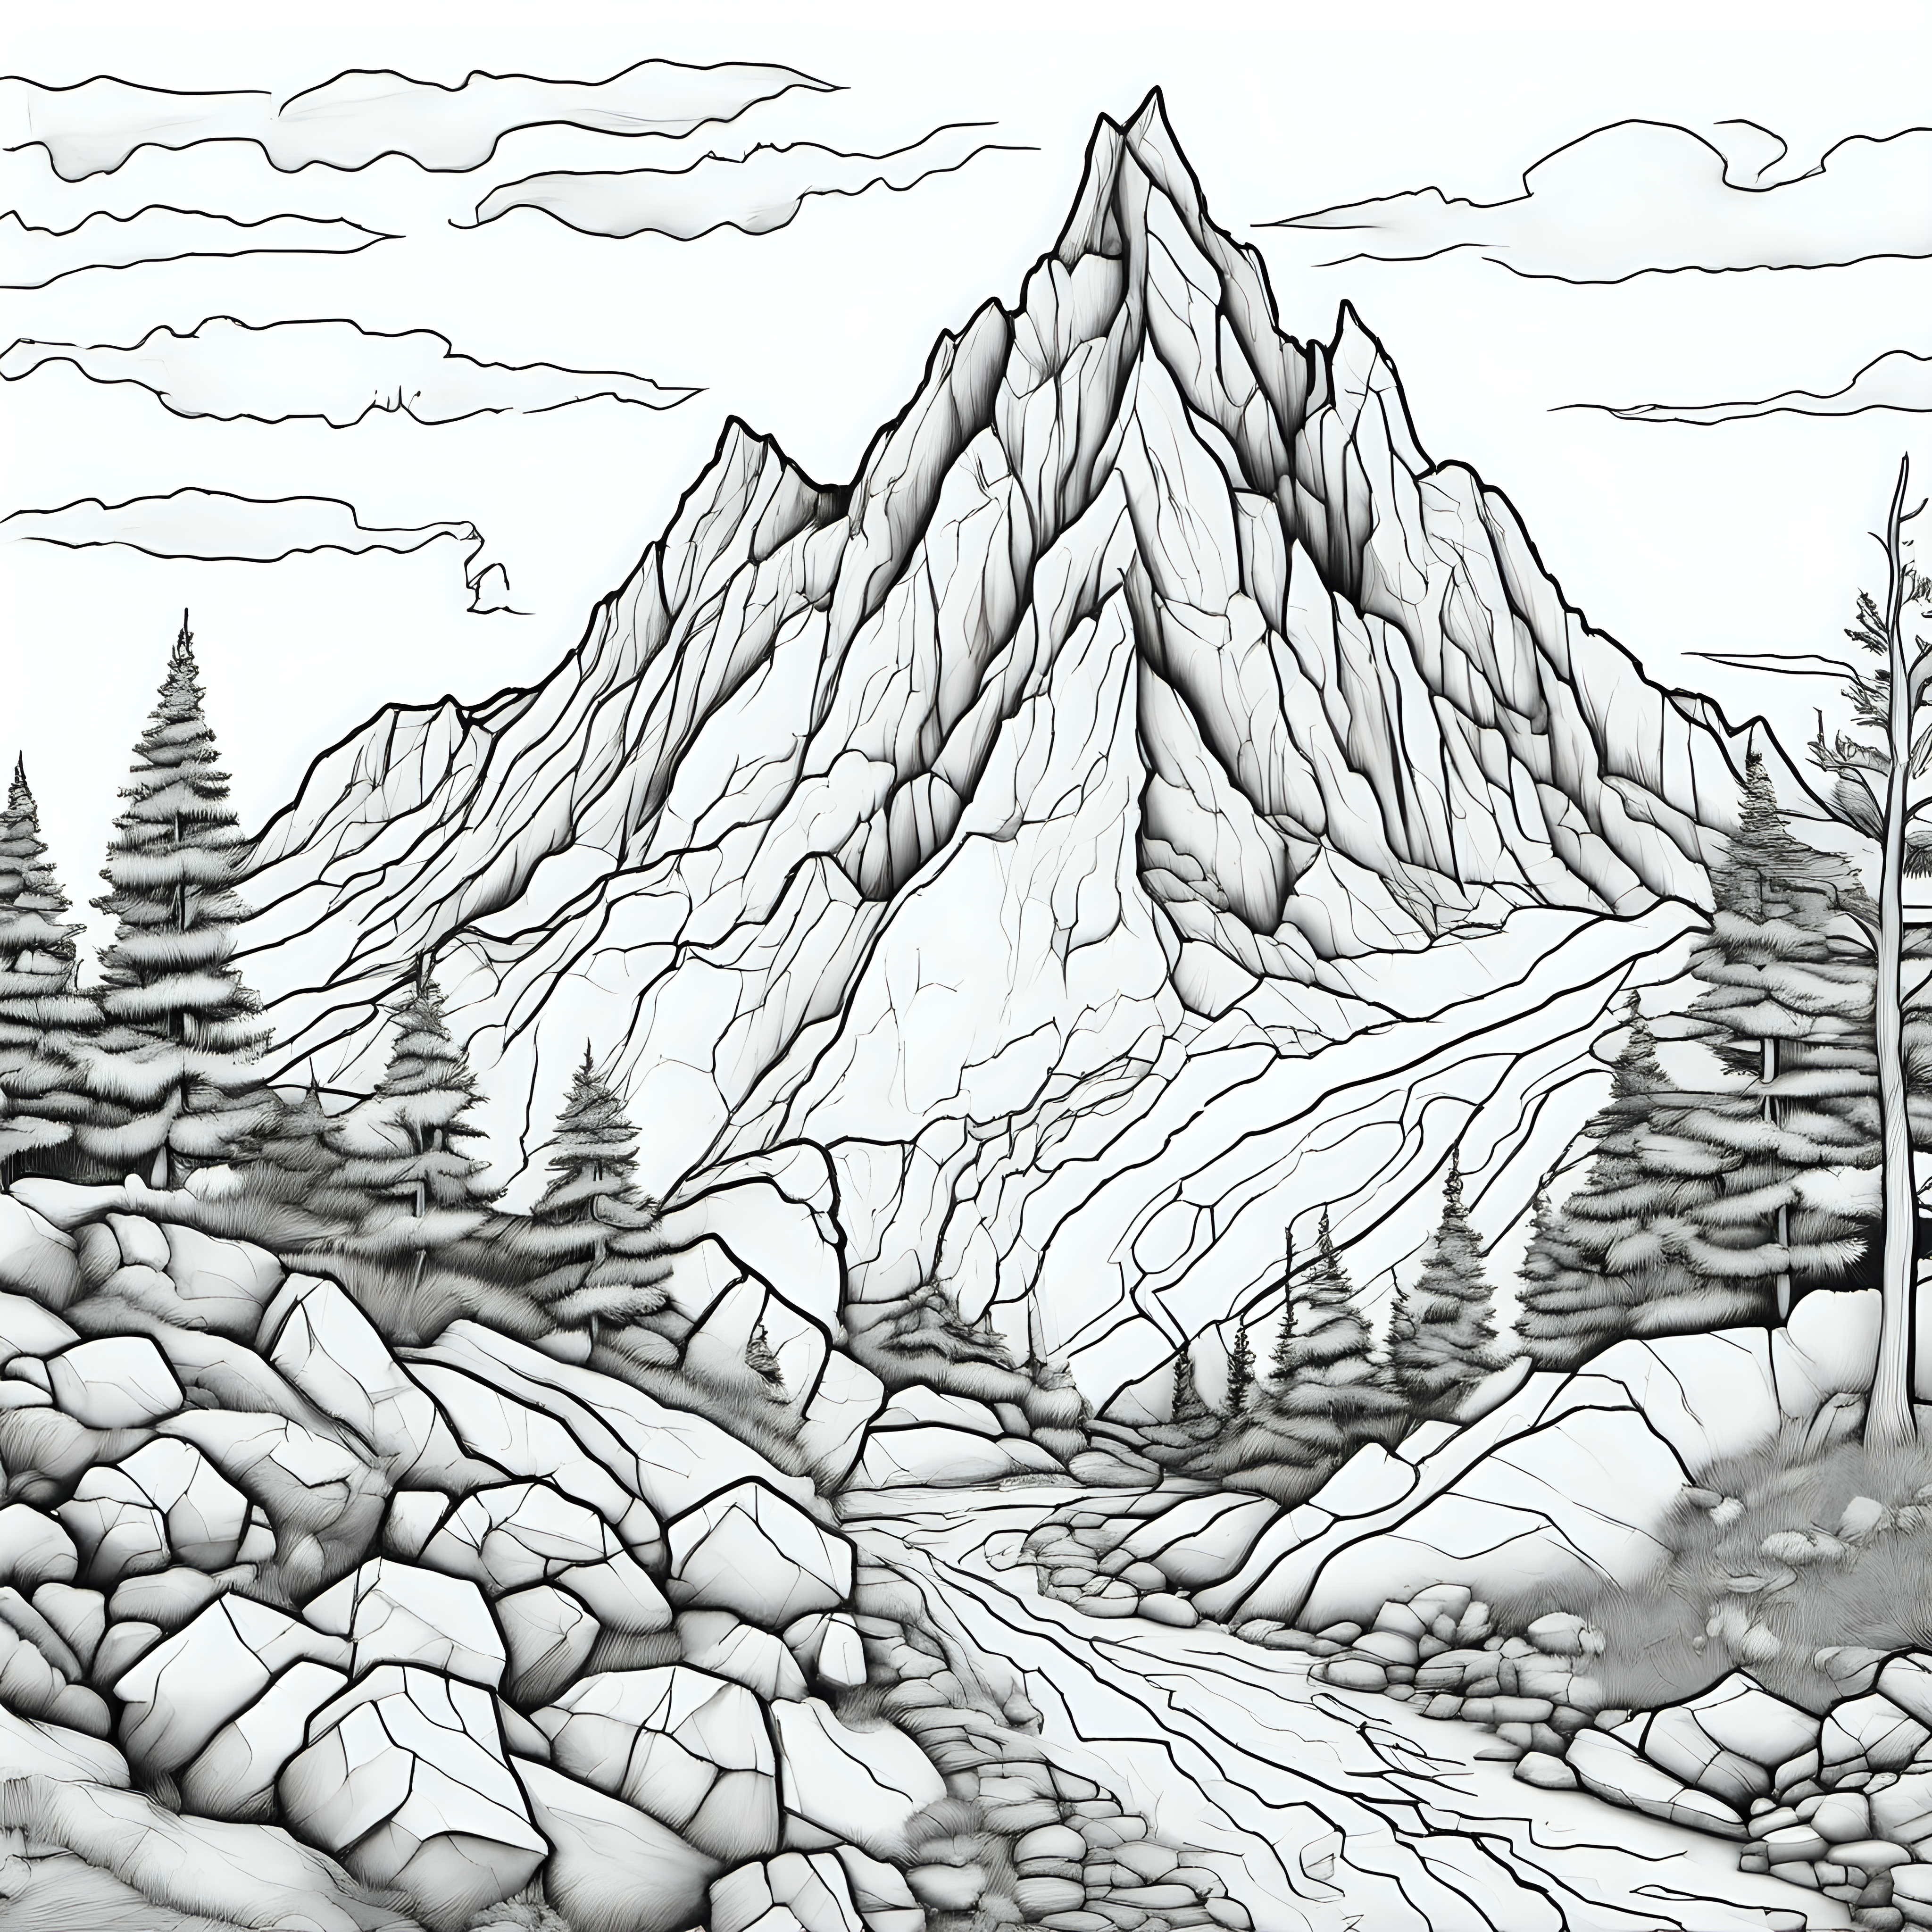 low detail coloring page of a mountain being broken down my weathering and erosion